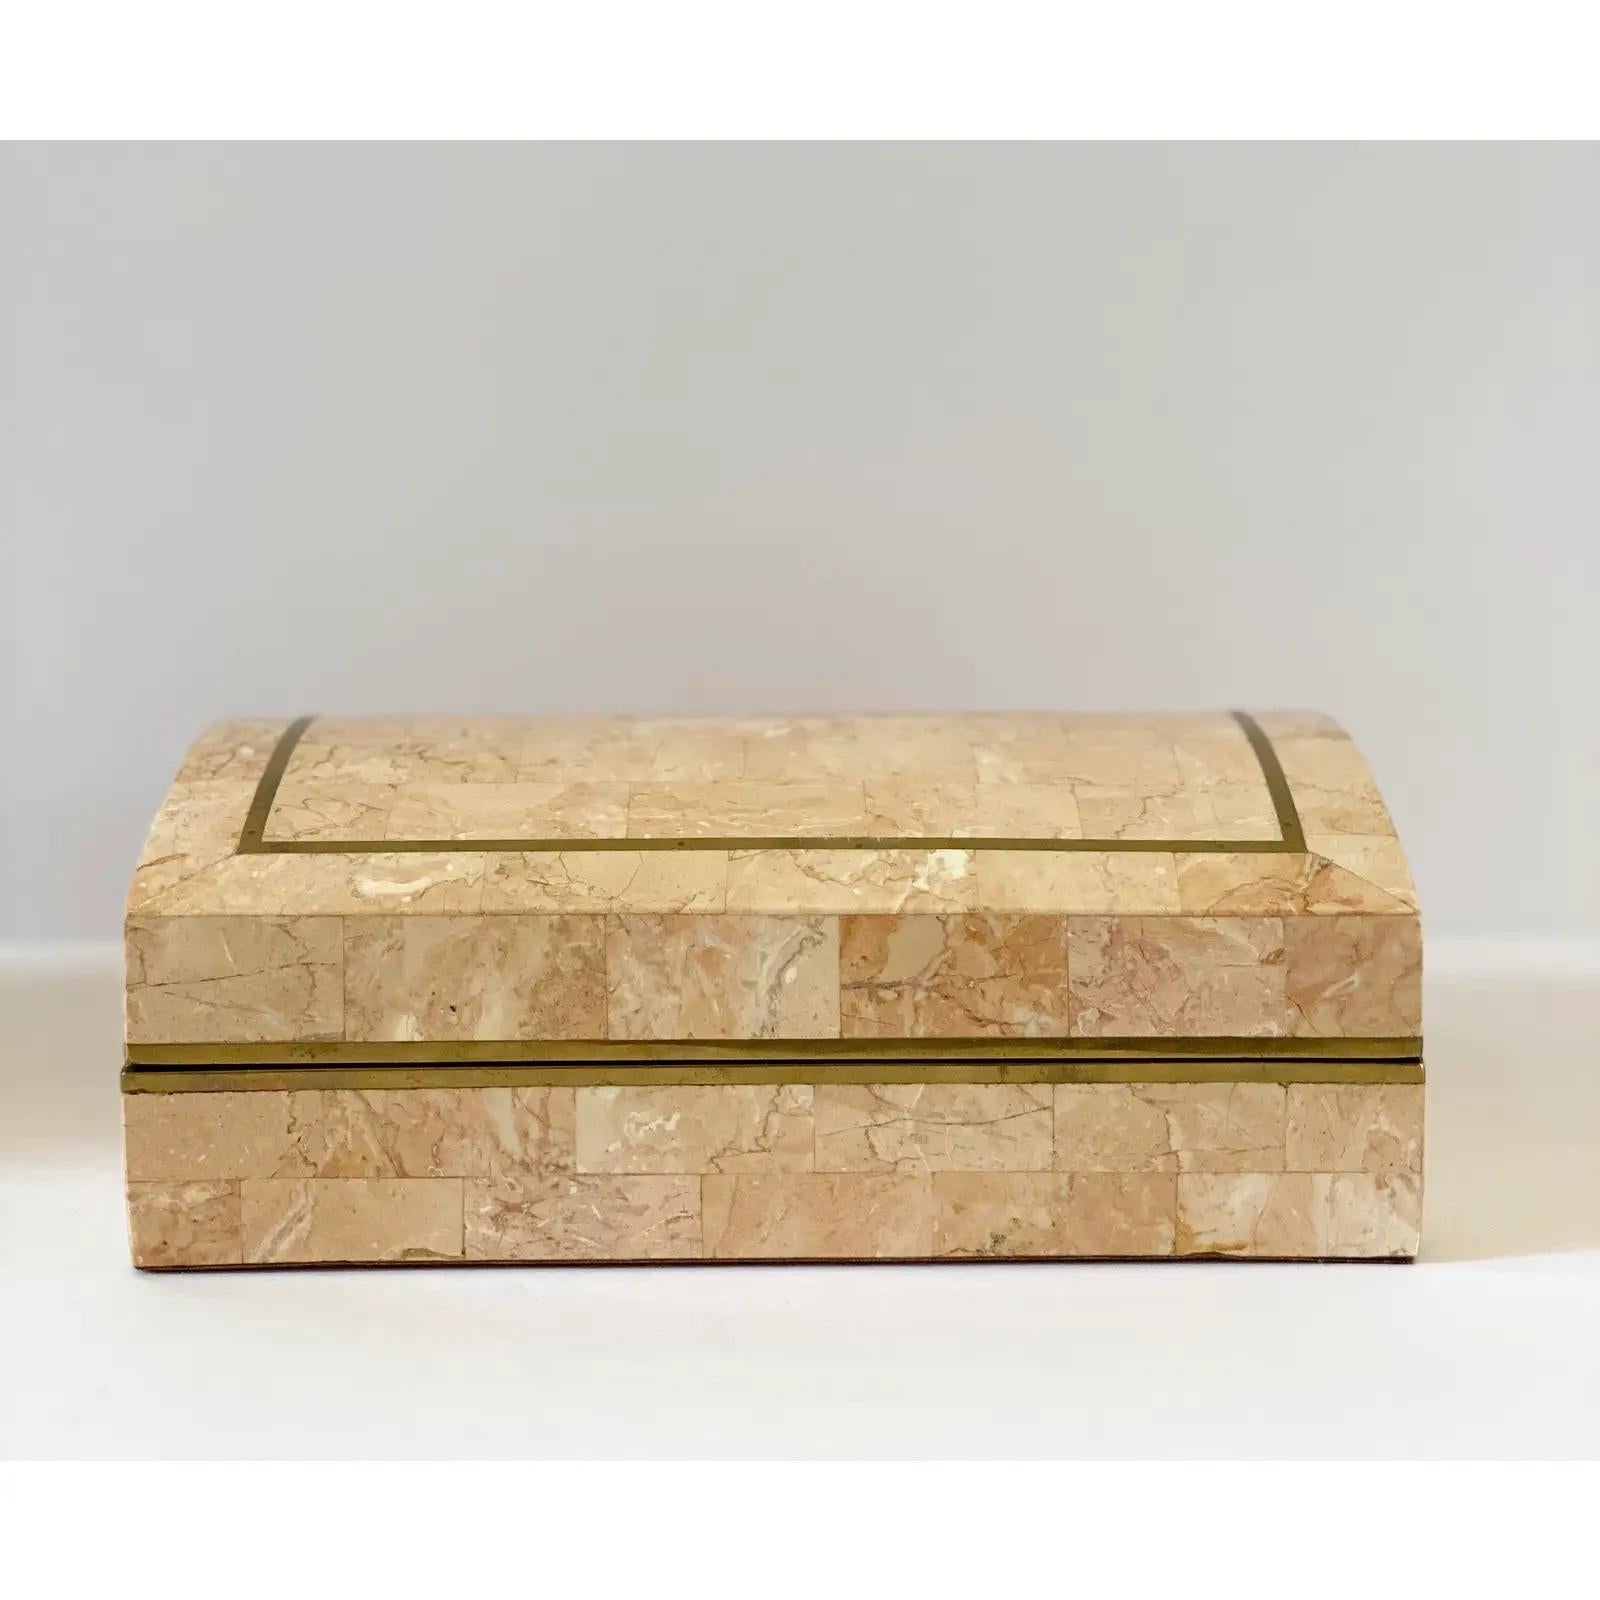 We are very pleased to offer a modern, tessellated stone storage box attributed to Maitland Smith, circa the 1980s. This gorgeous box features a tessellated stone exterior with inlaid brass trim. The curved dome lid opens to unveil a maple-brown